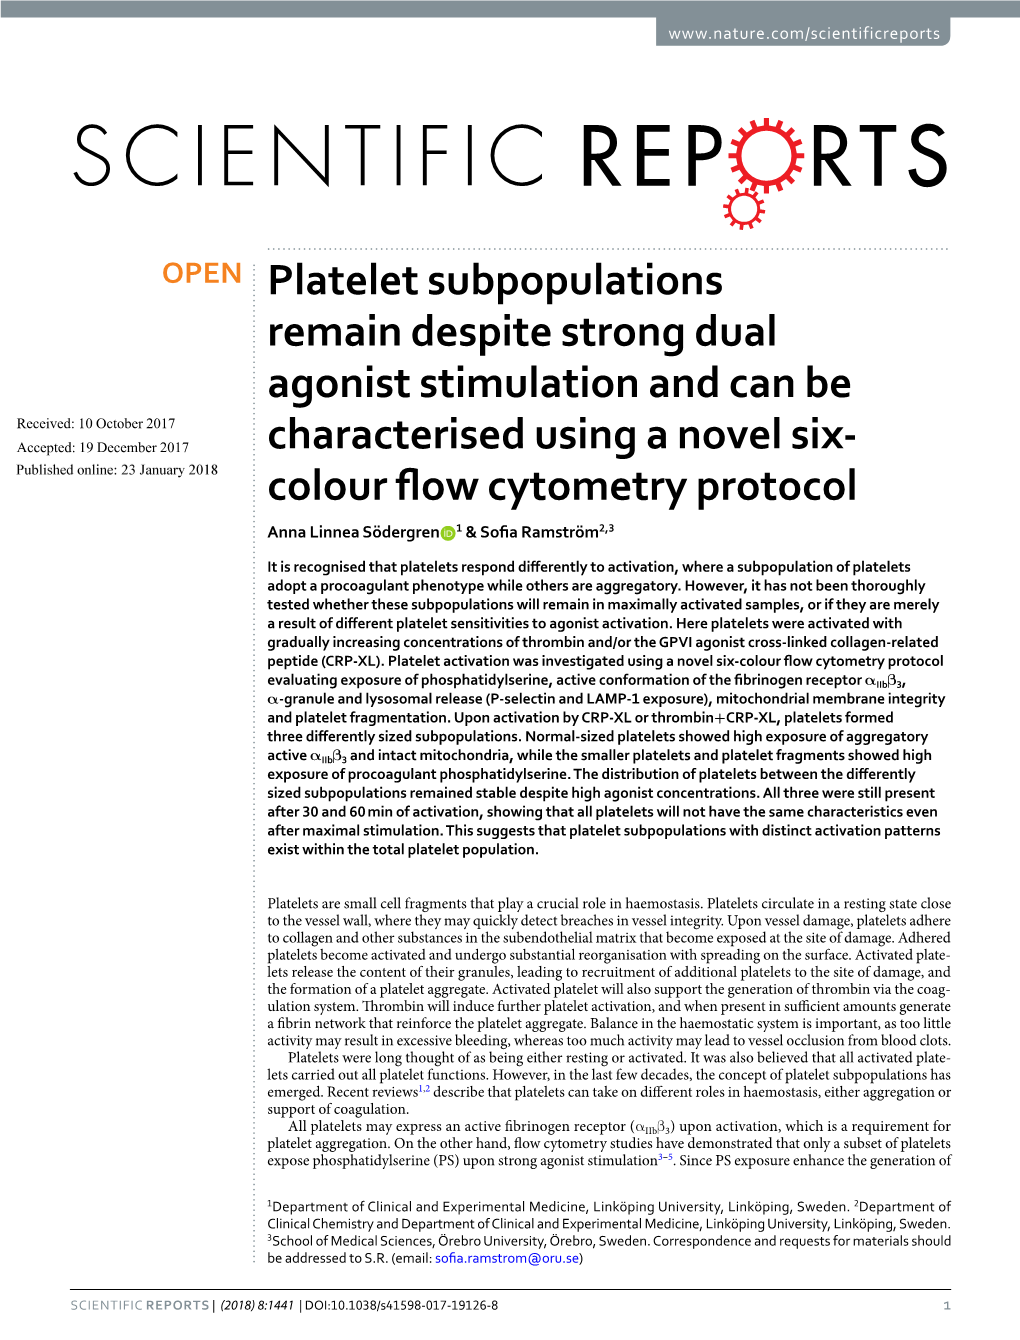 Platelet Subpopulations Remain Despite Strong Dual Agonist